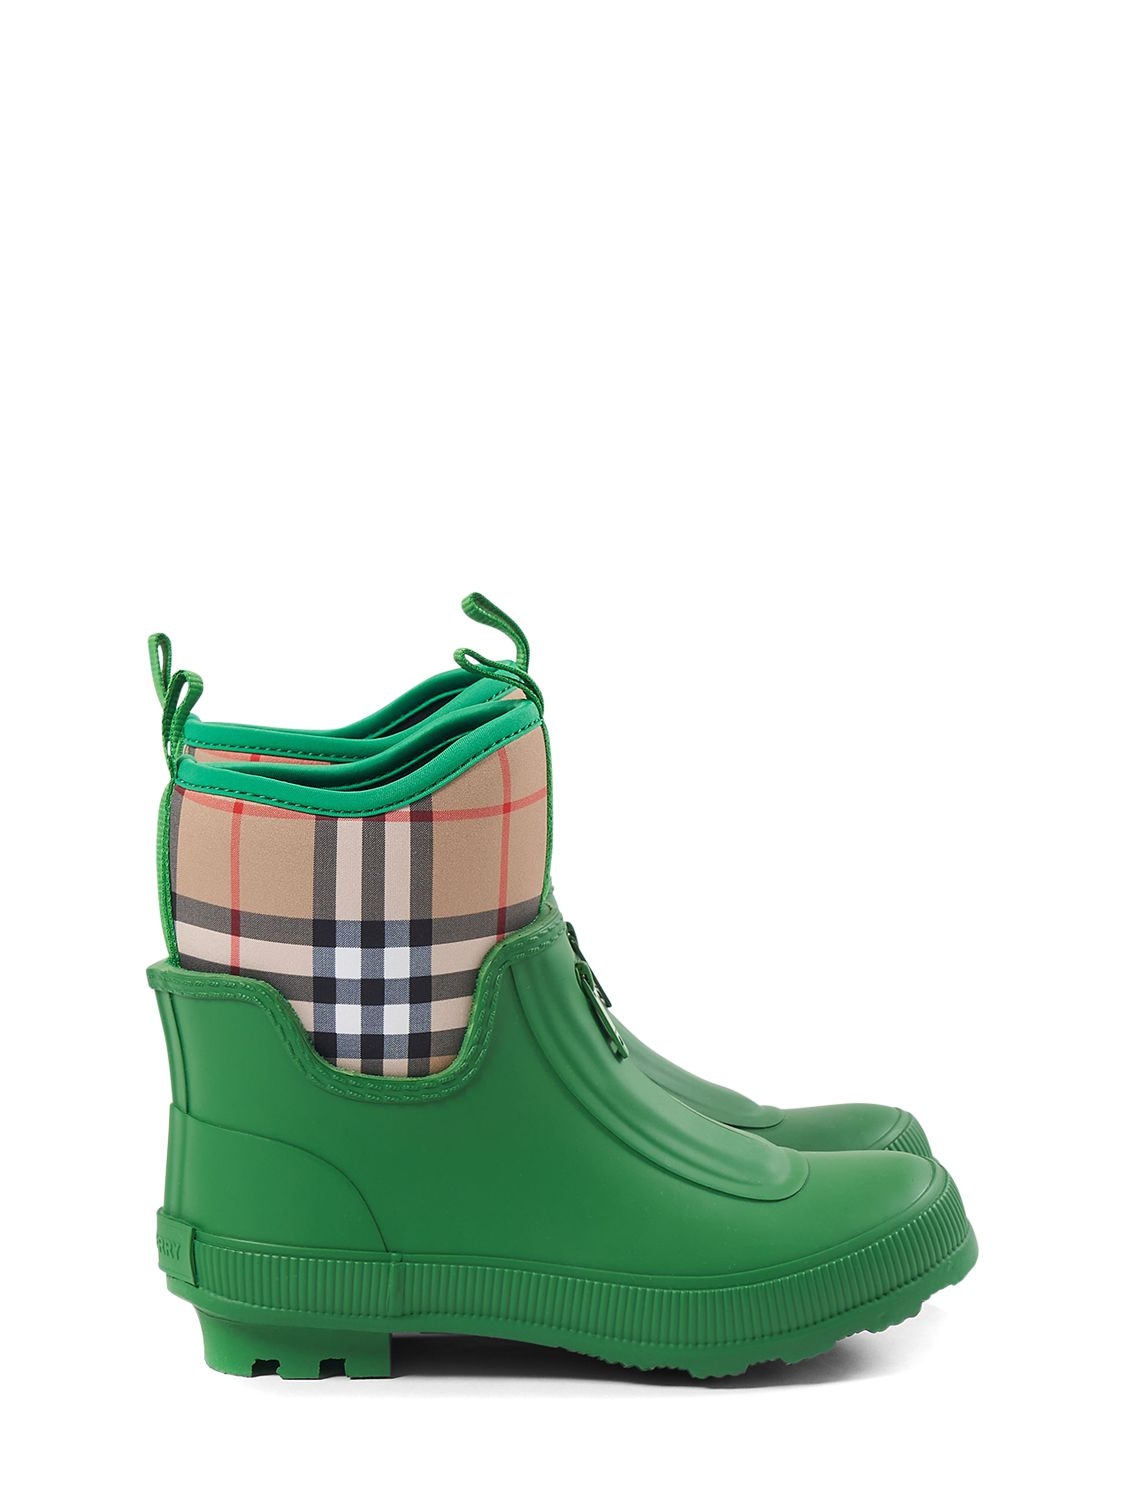 Rubber Ankle Boots W/check Print Inserts